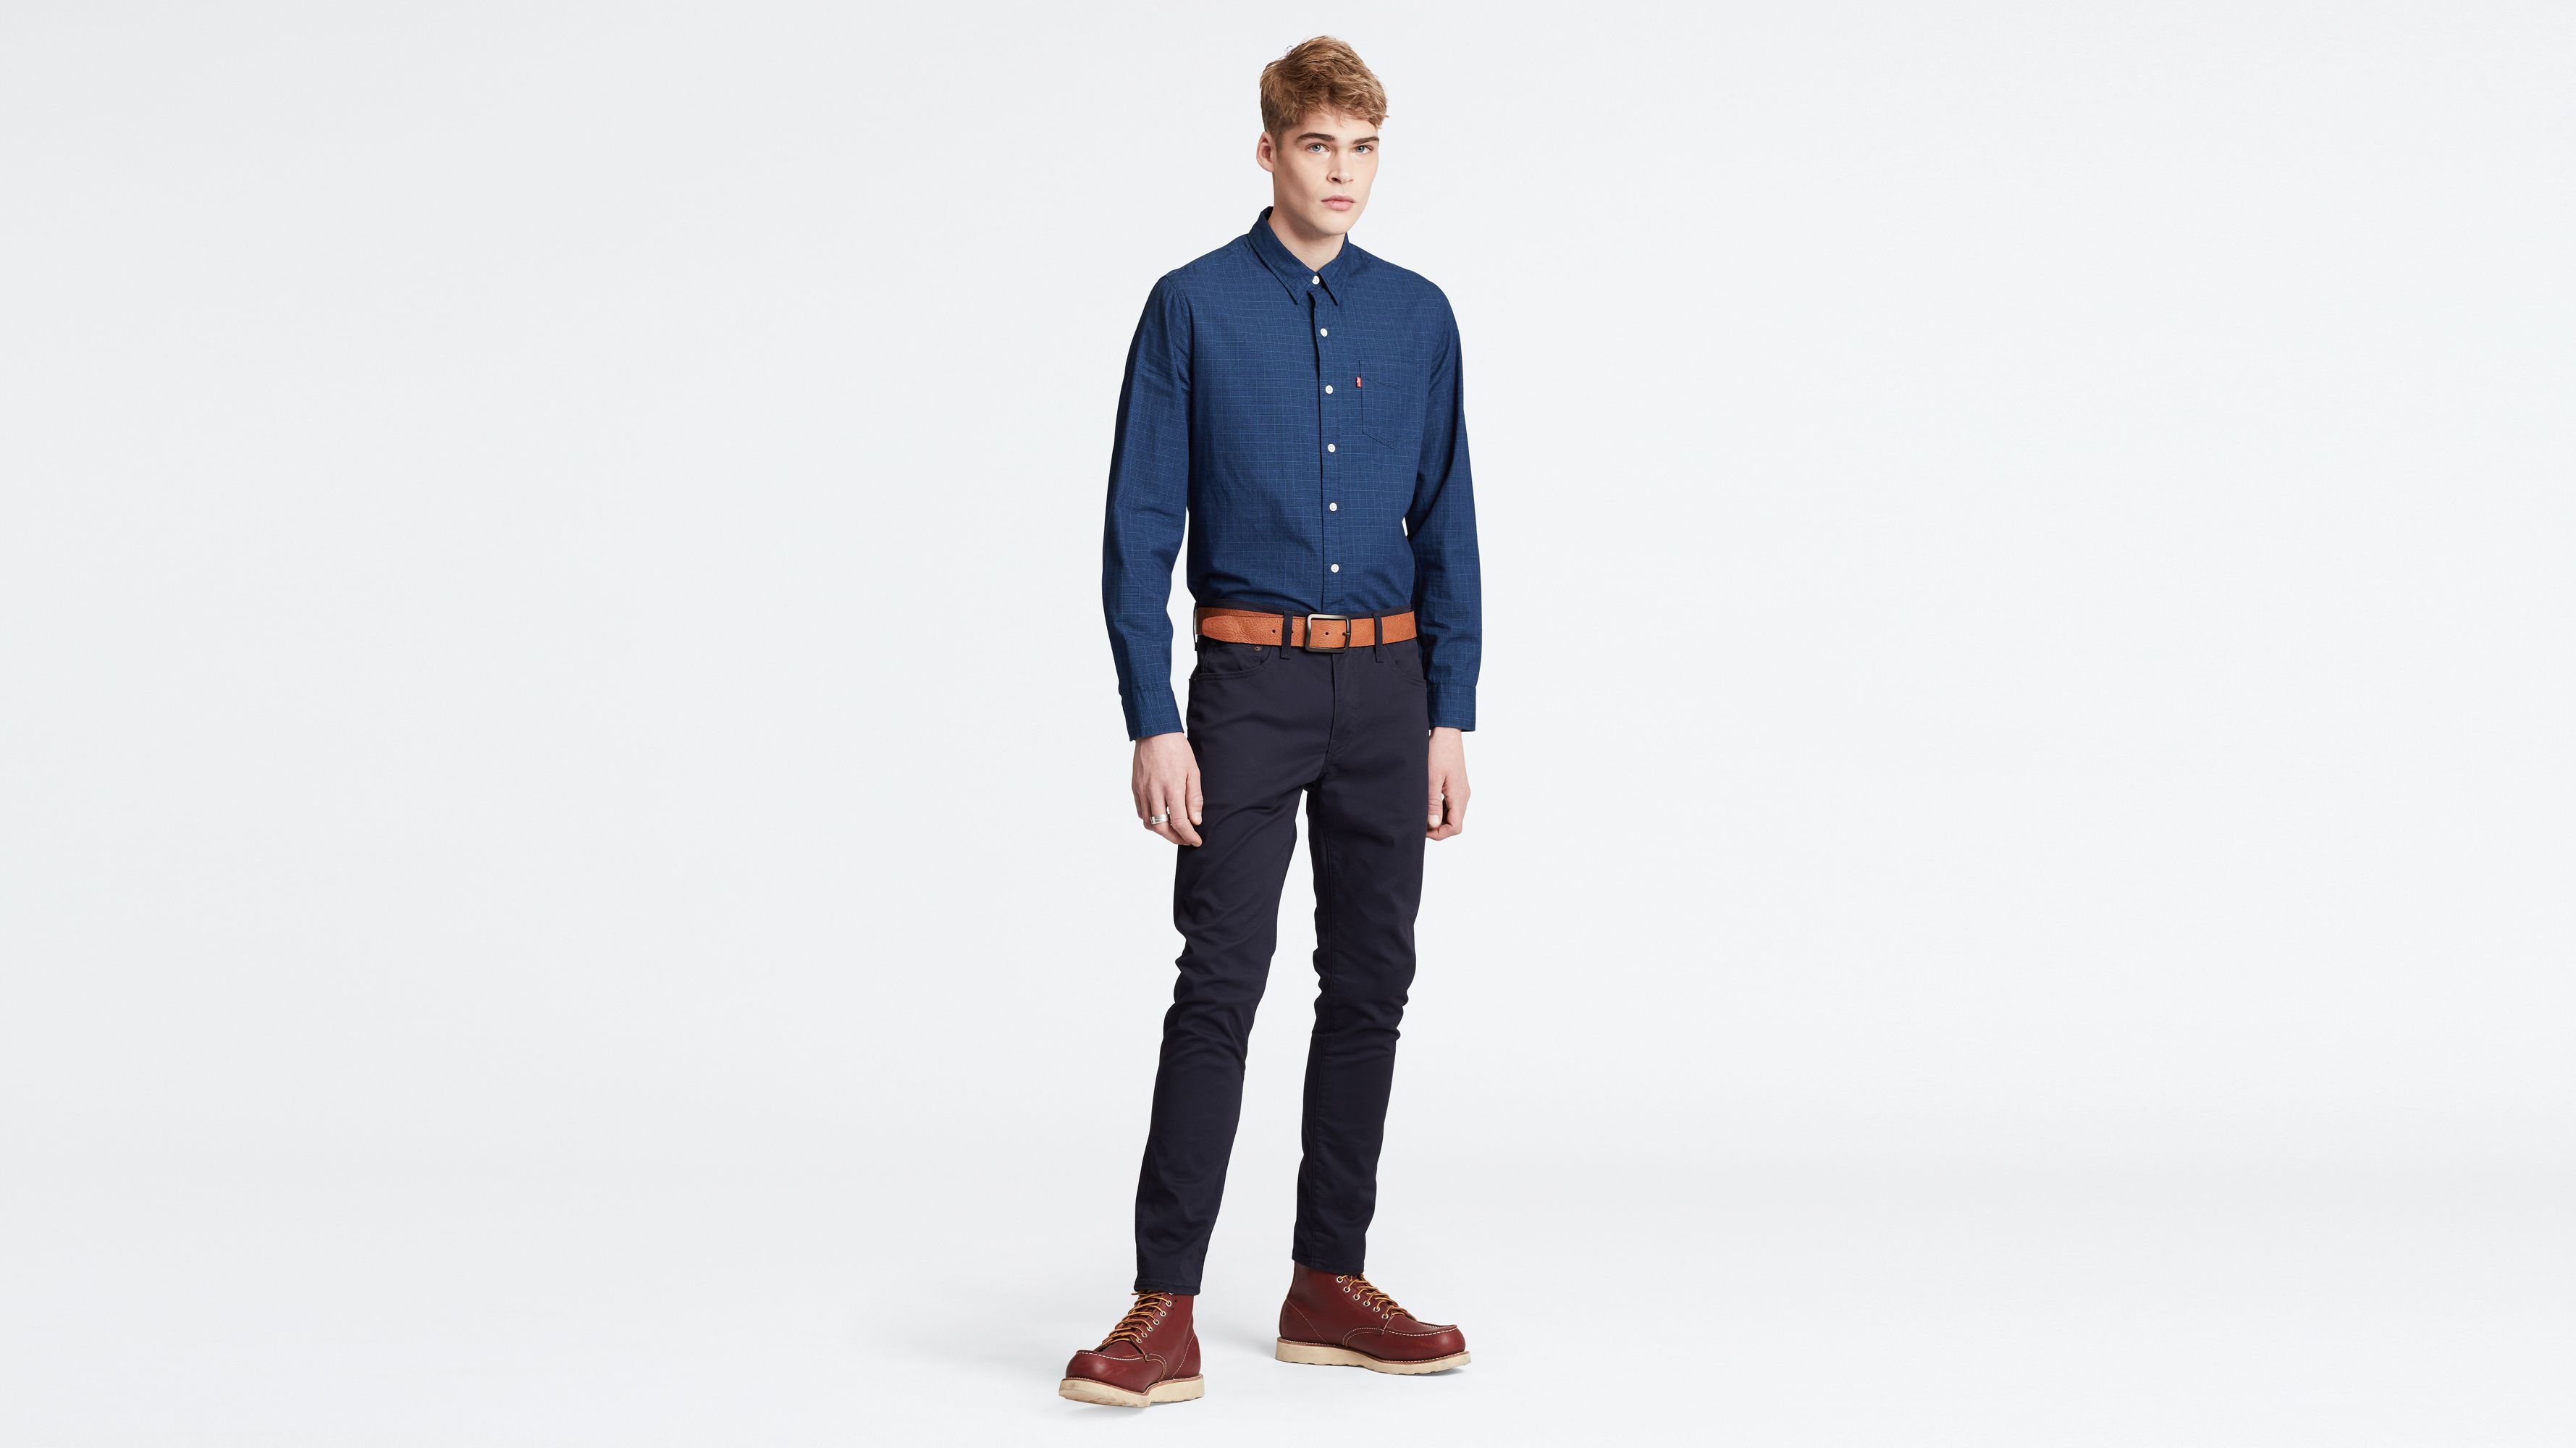 levis formal trousers